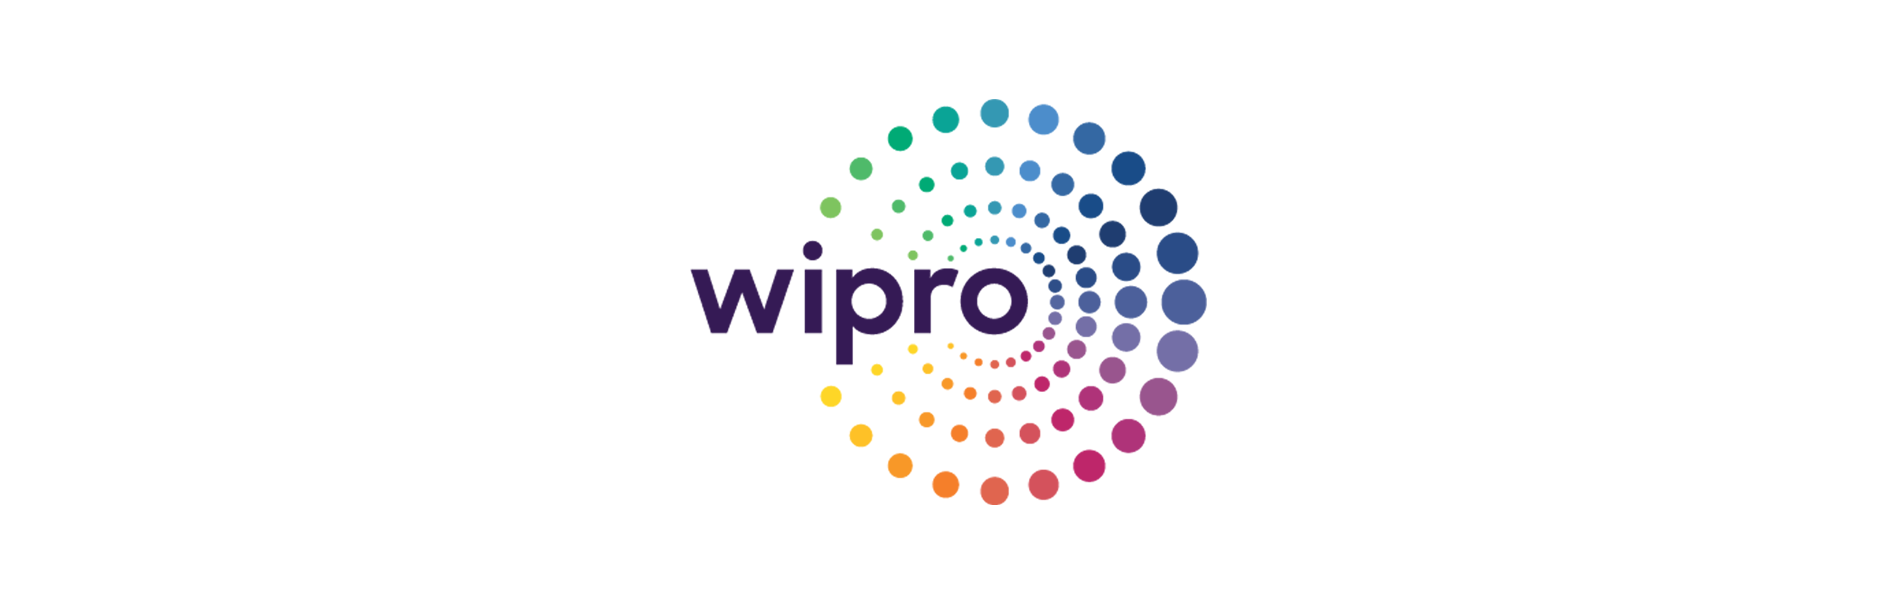 Cloud Adoption is Helping Healthcare Providers Drive Higher Levels of Patient Care - Wipro